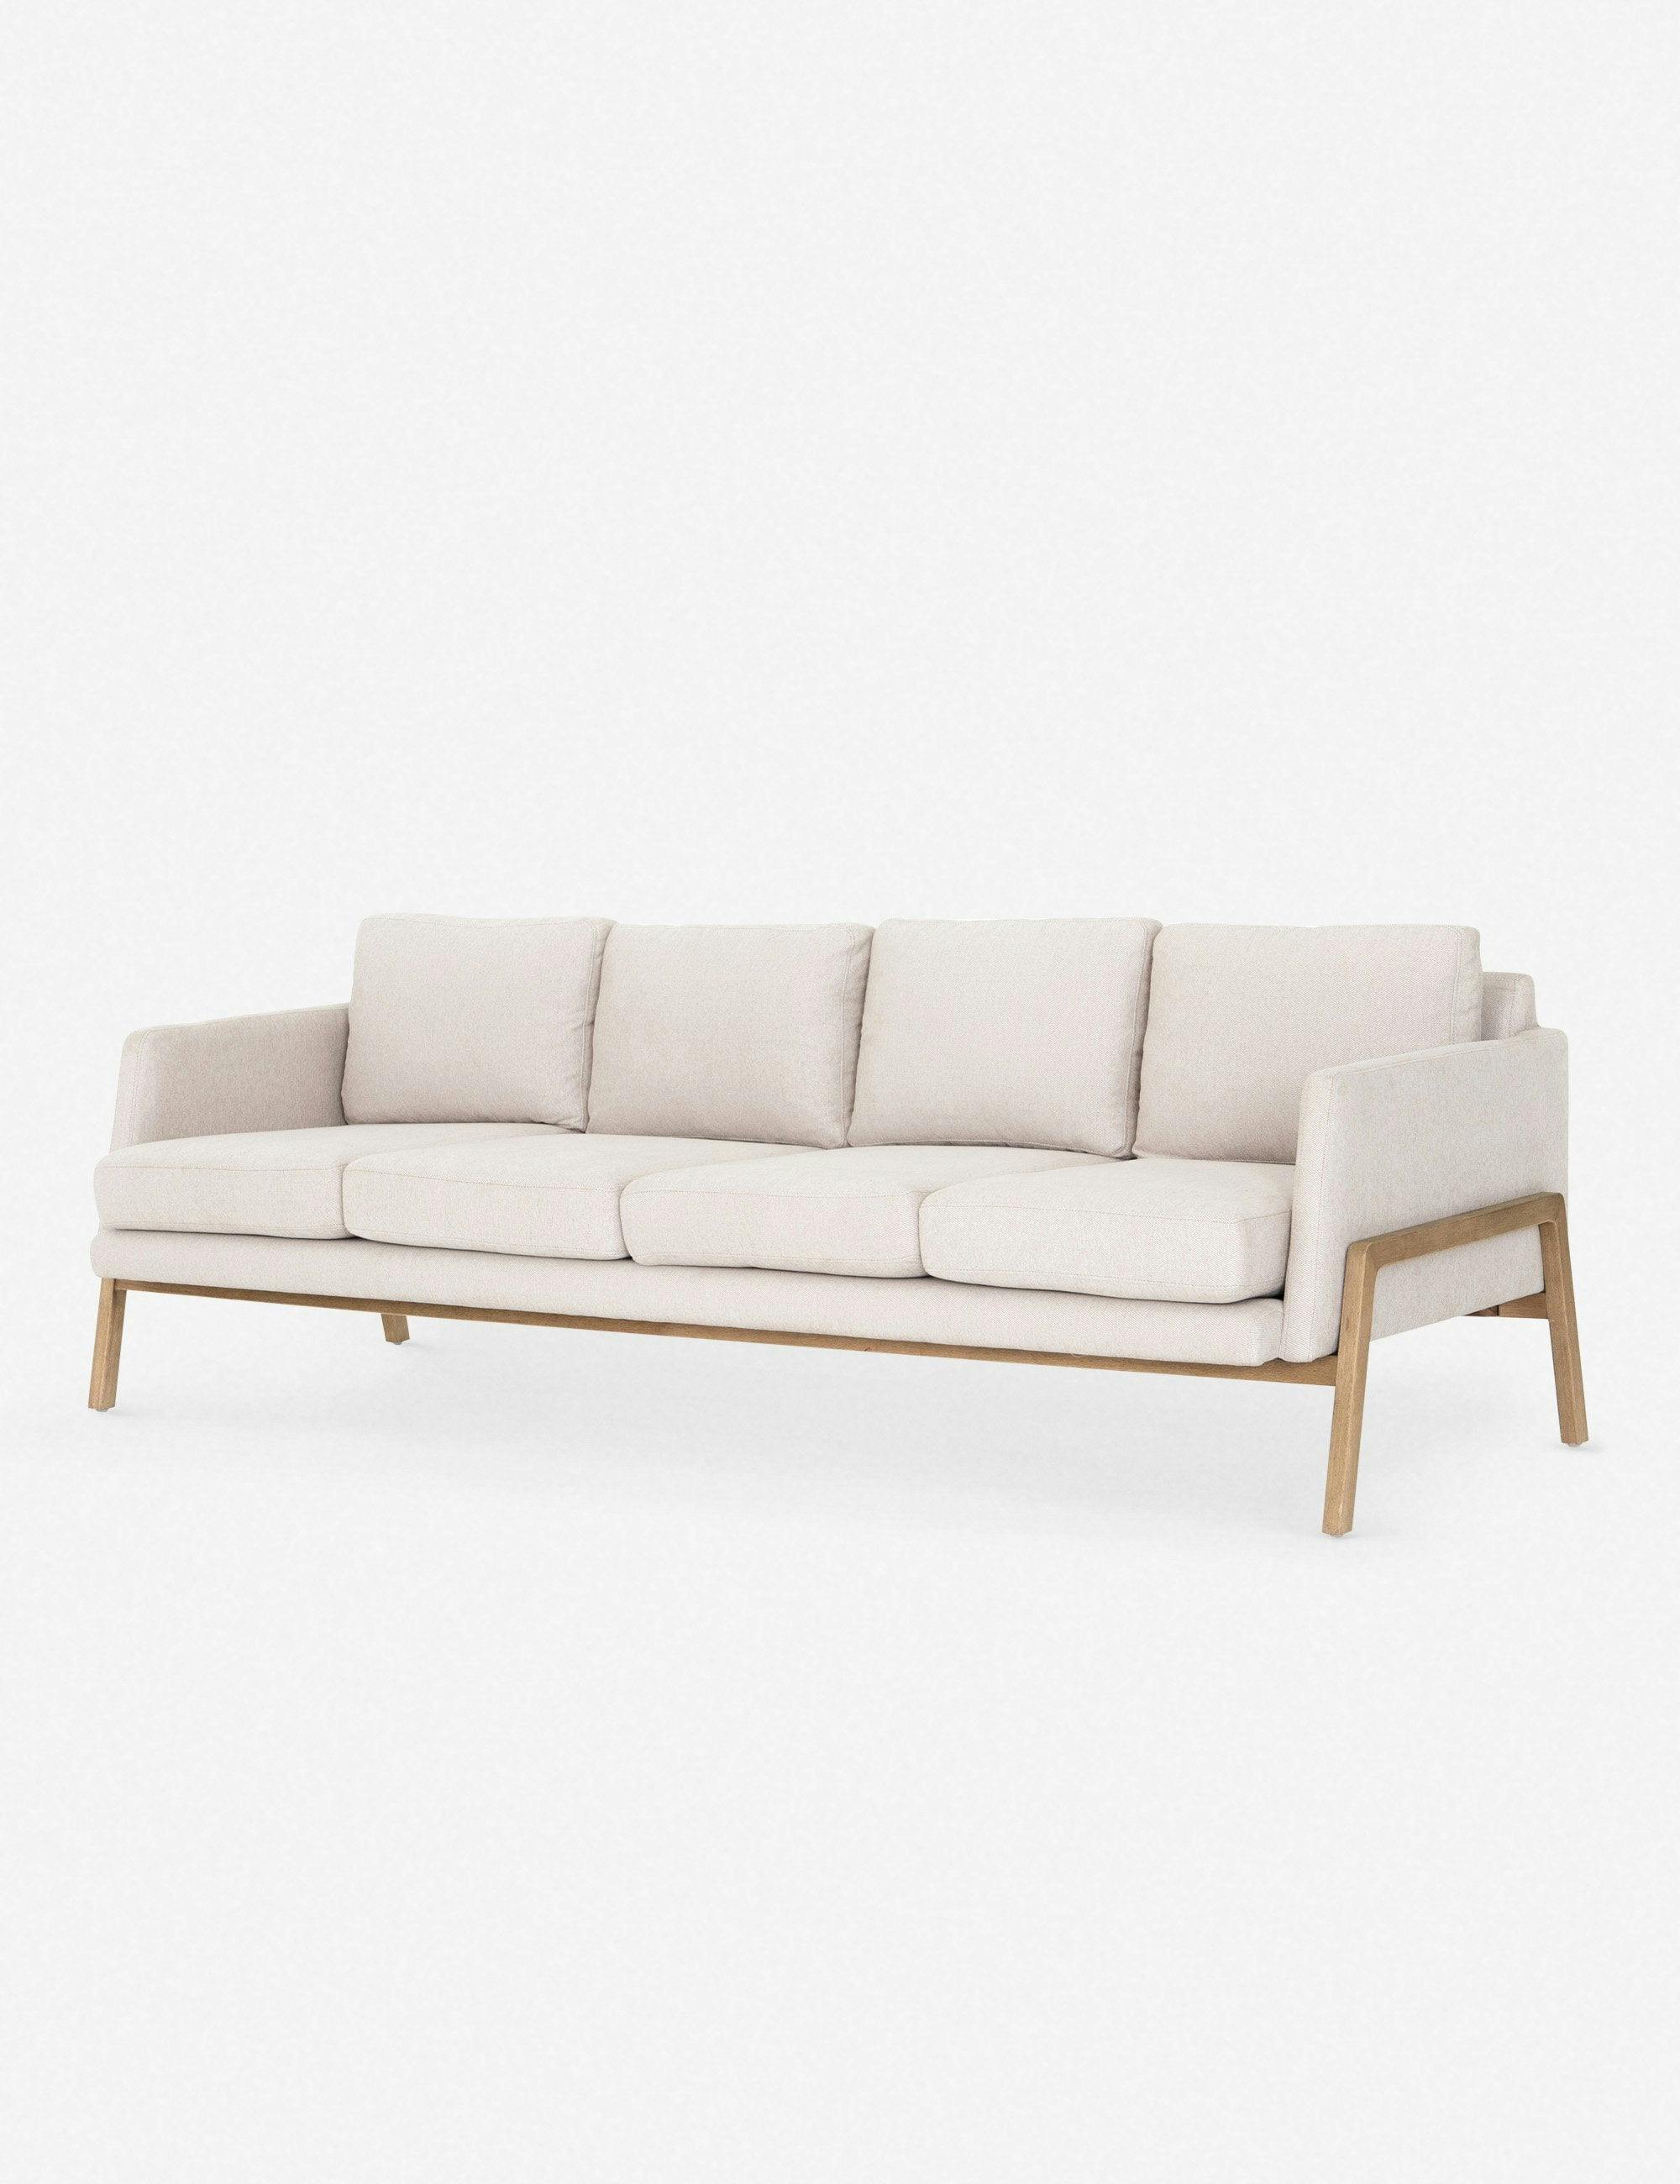 Afton Natural Performance Fabric Angled Wooden Frame Sofa